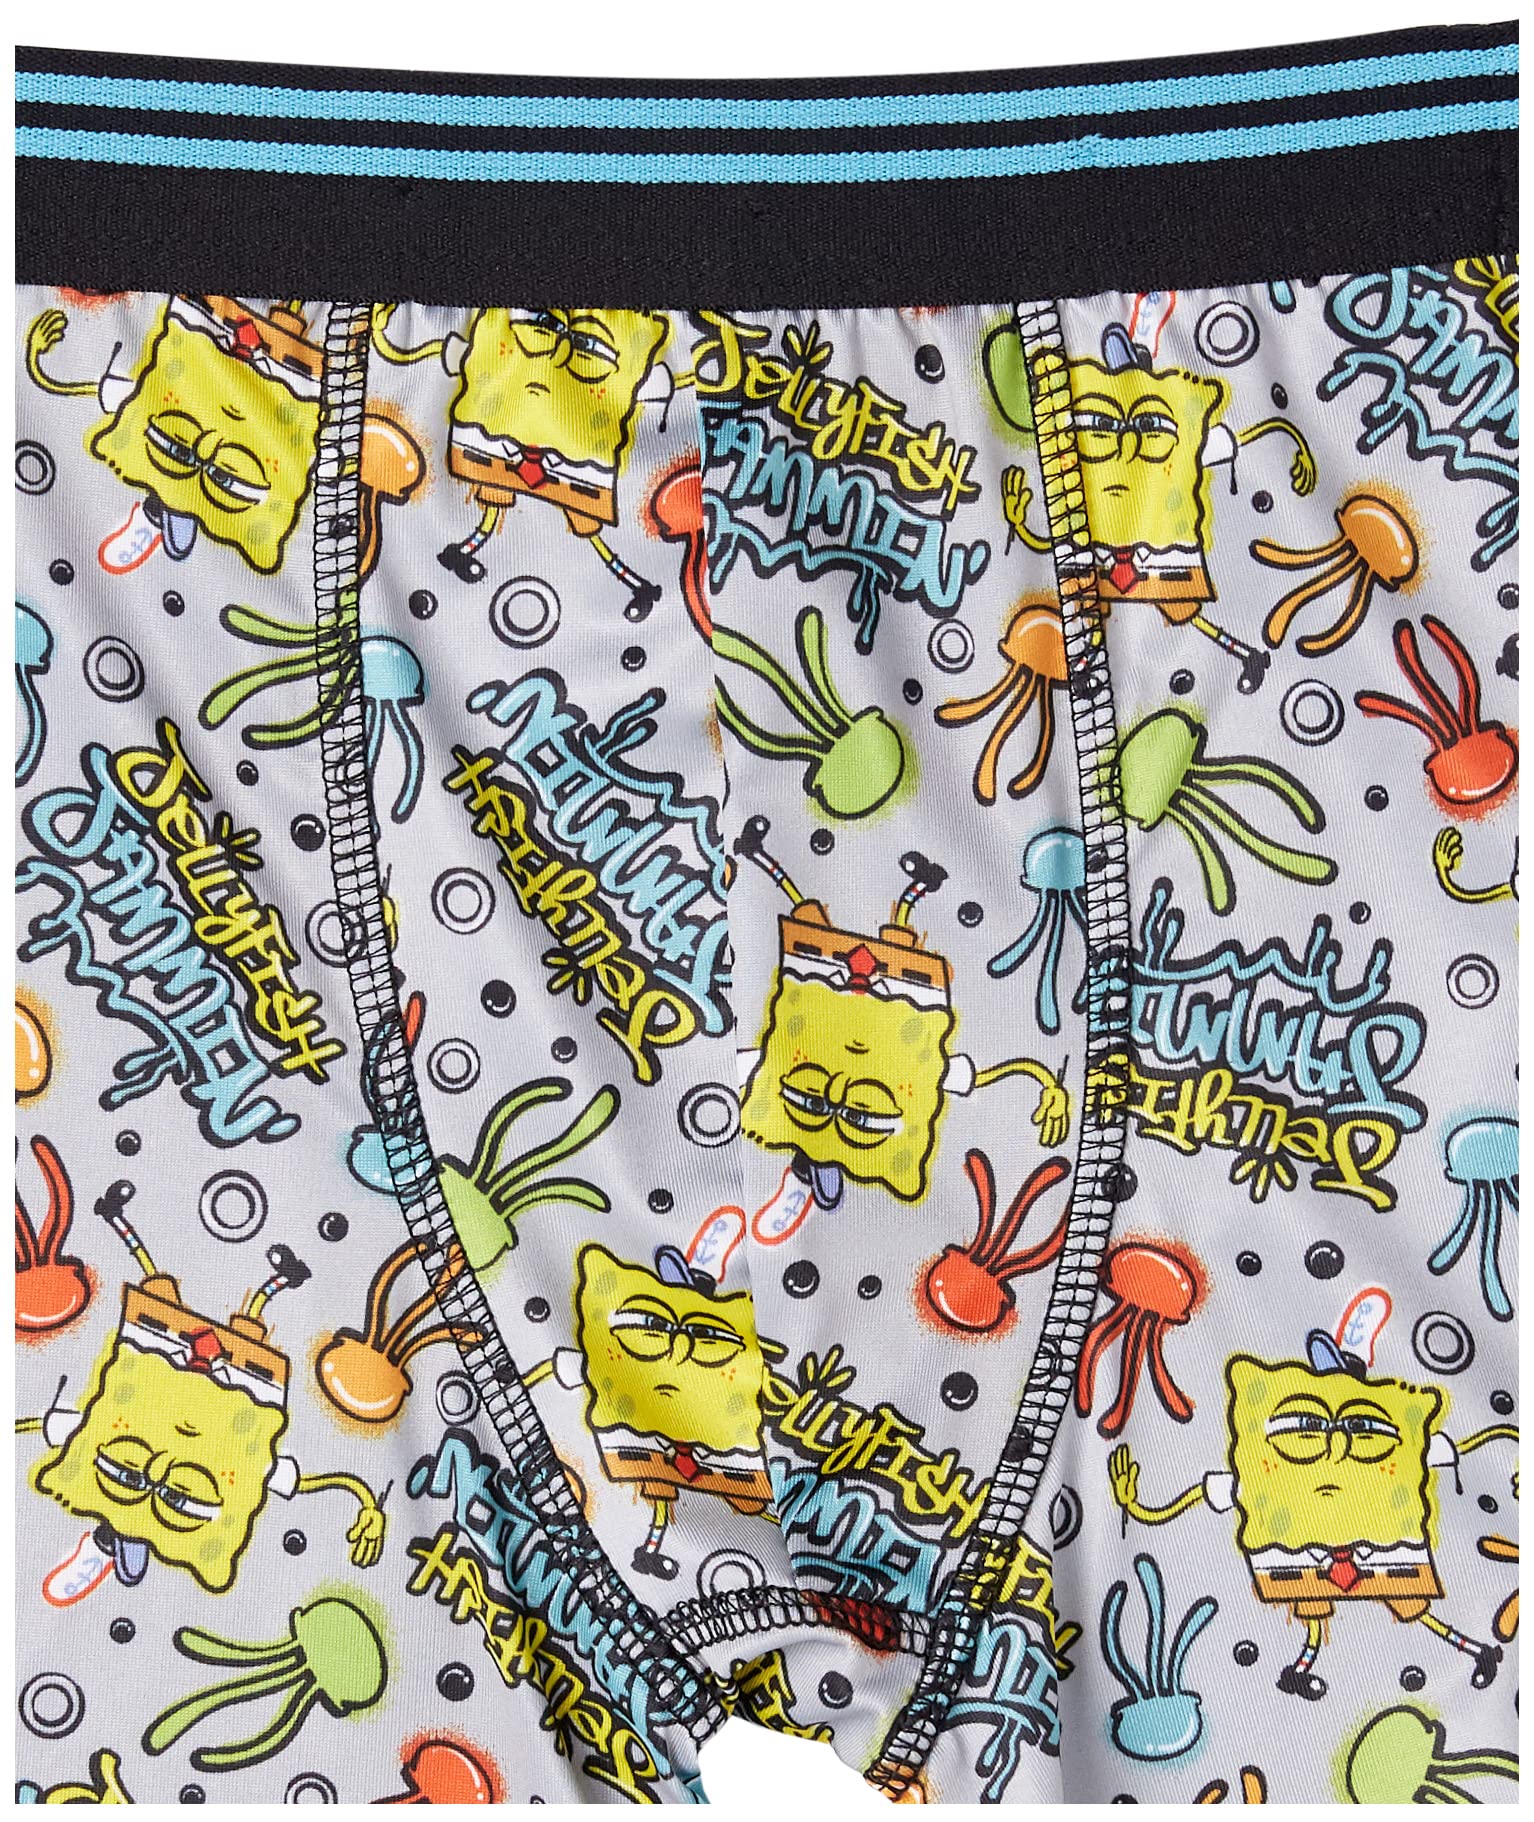 SpongeBob SquarePants Boys' Amazon Exclusive Underwear Multipacks with Patrick, Squidward and More in Sizes 4, 6, 8, 10 & 12